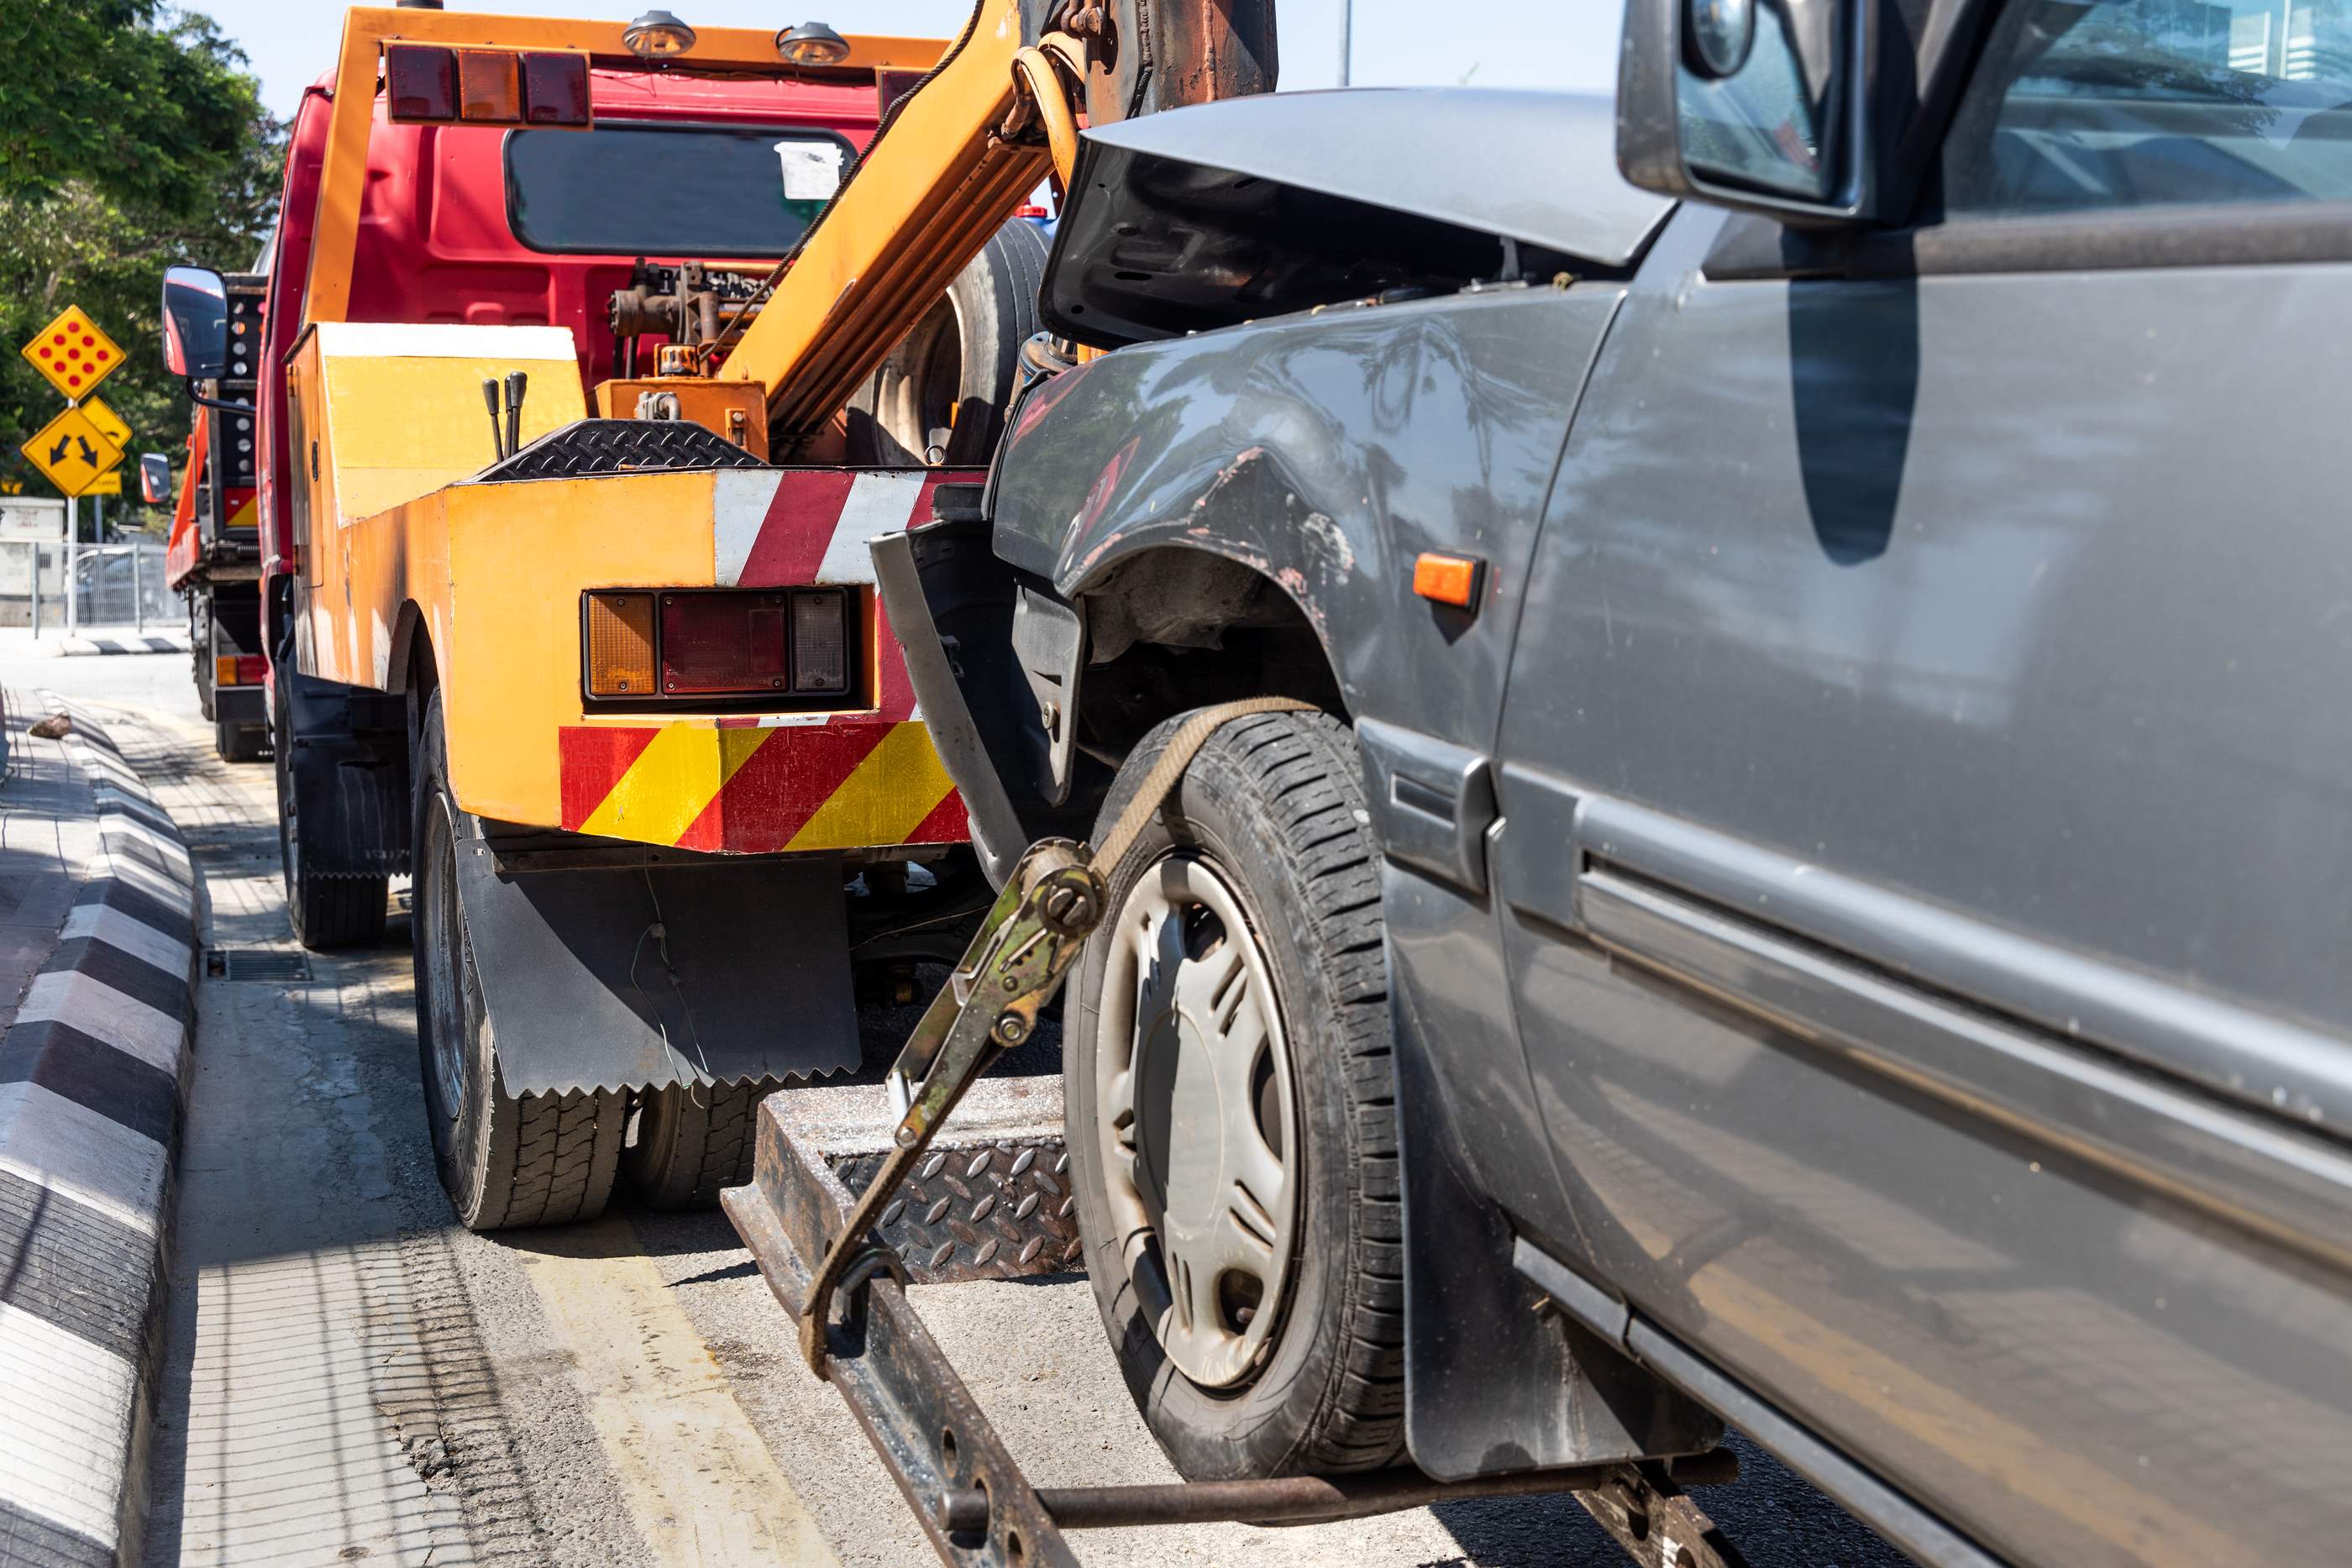 tpw truck accident injury lawsuit attorney Florida